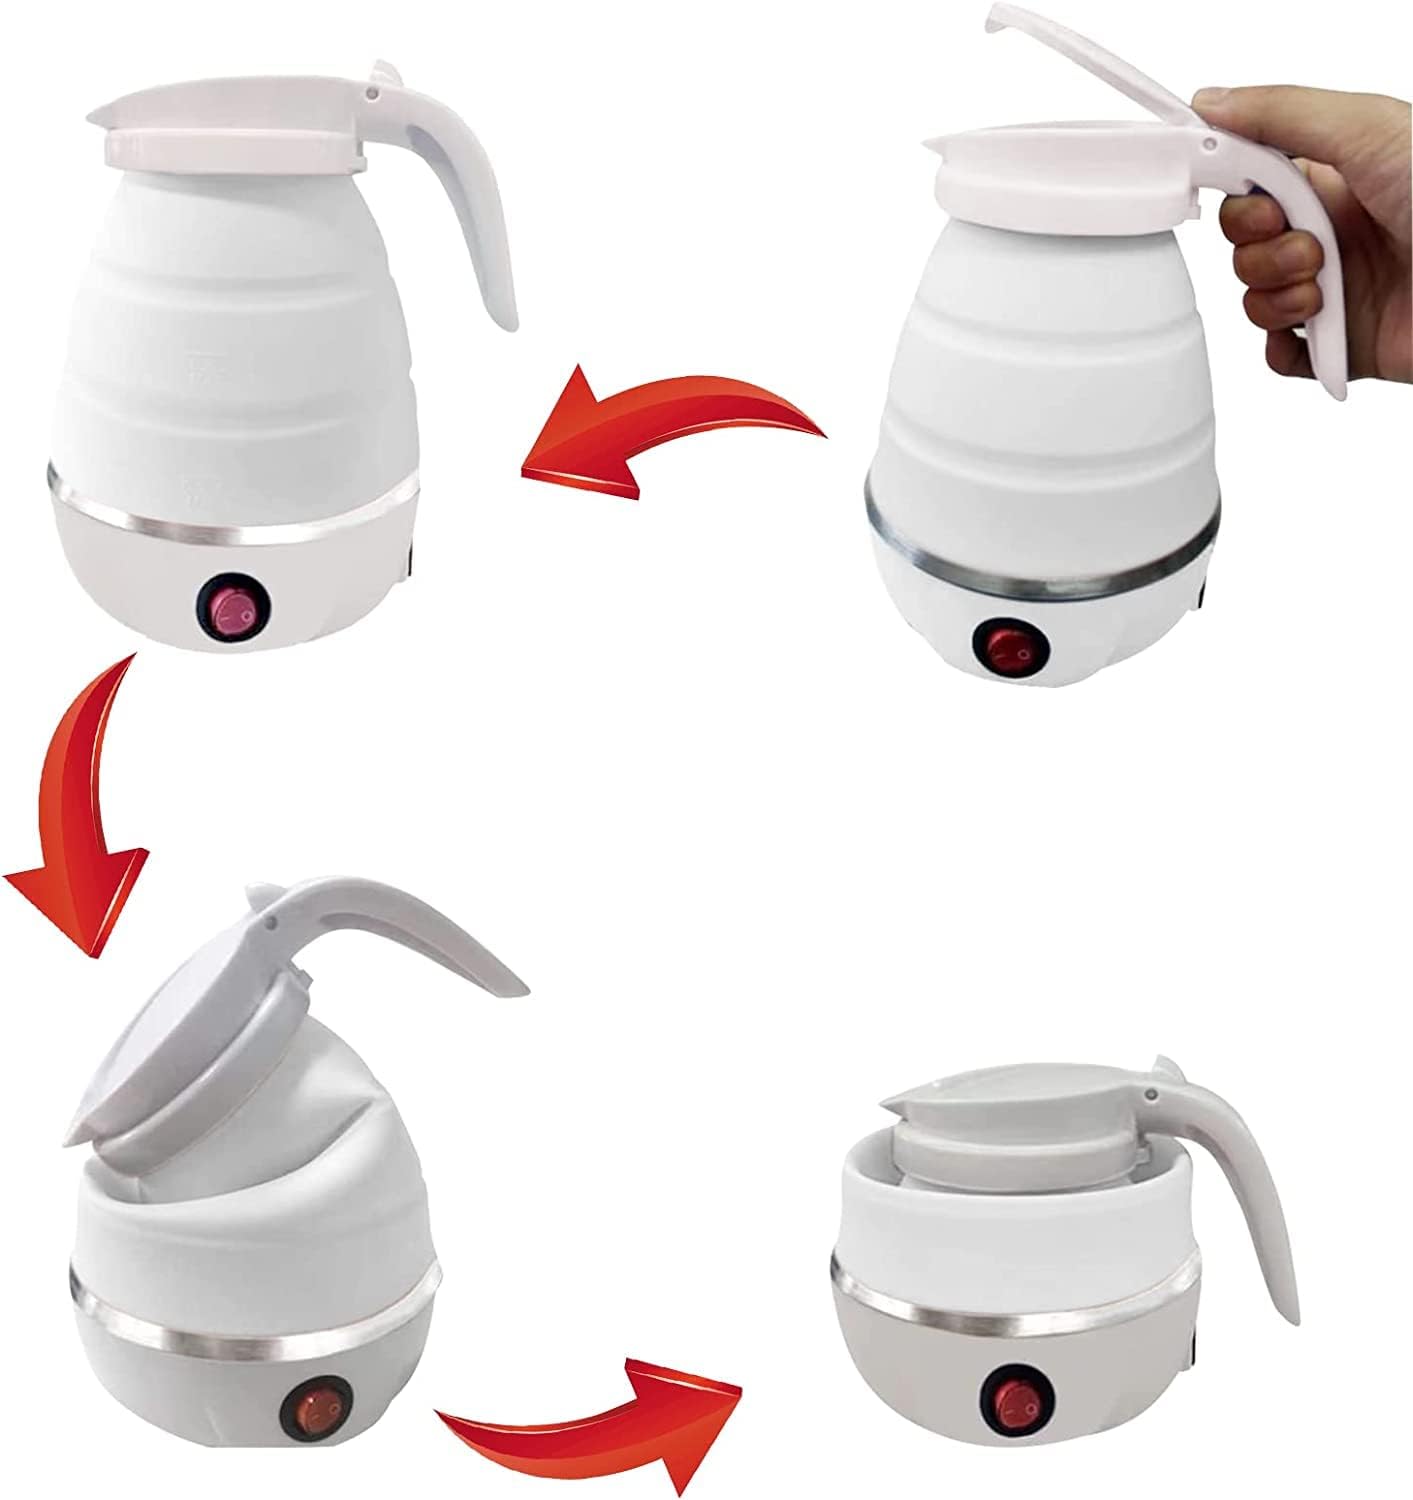 Compact Electric Kettle: Your Portable Solution for Instant Hot Water